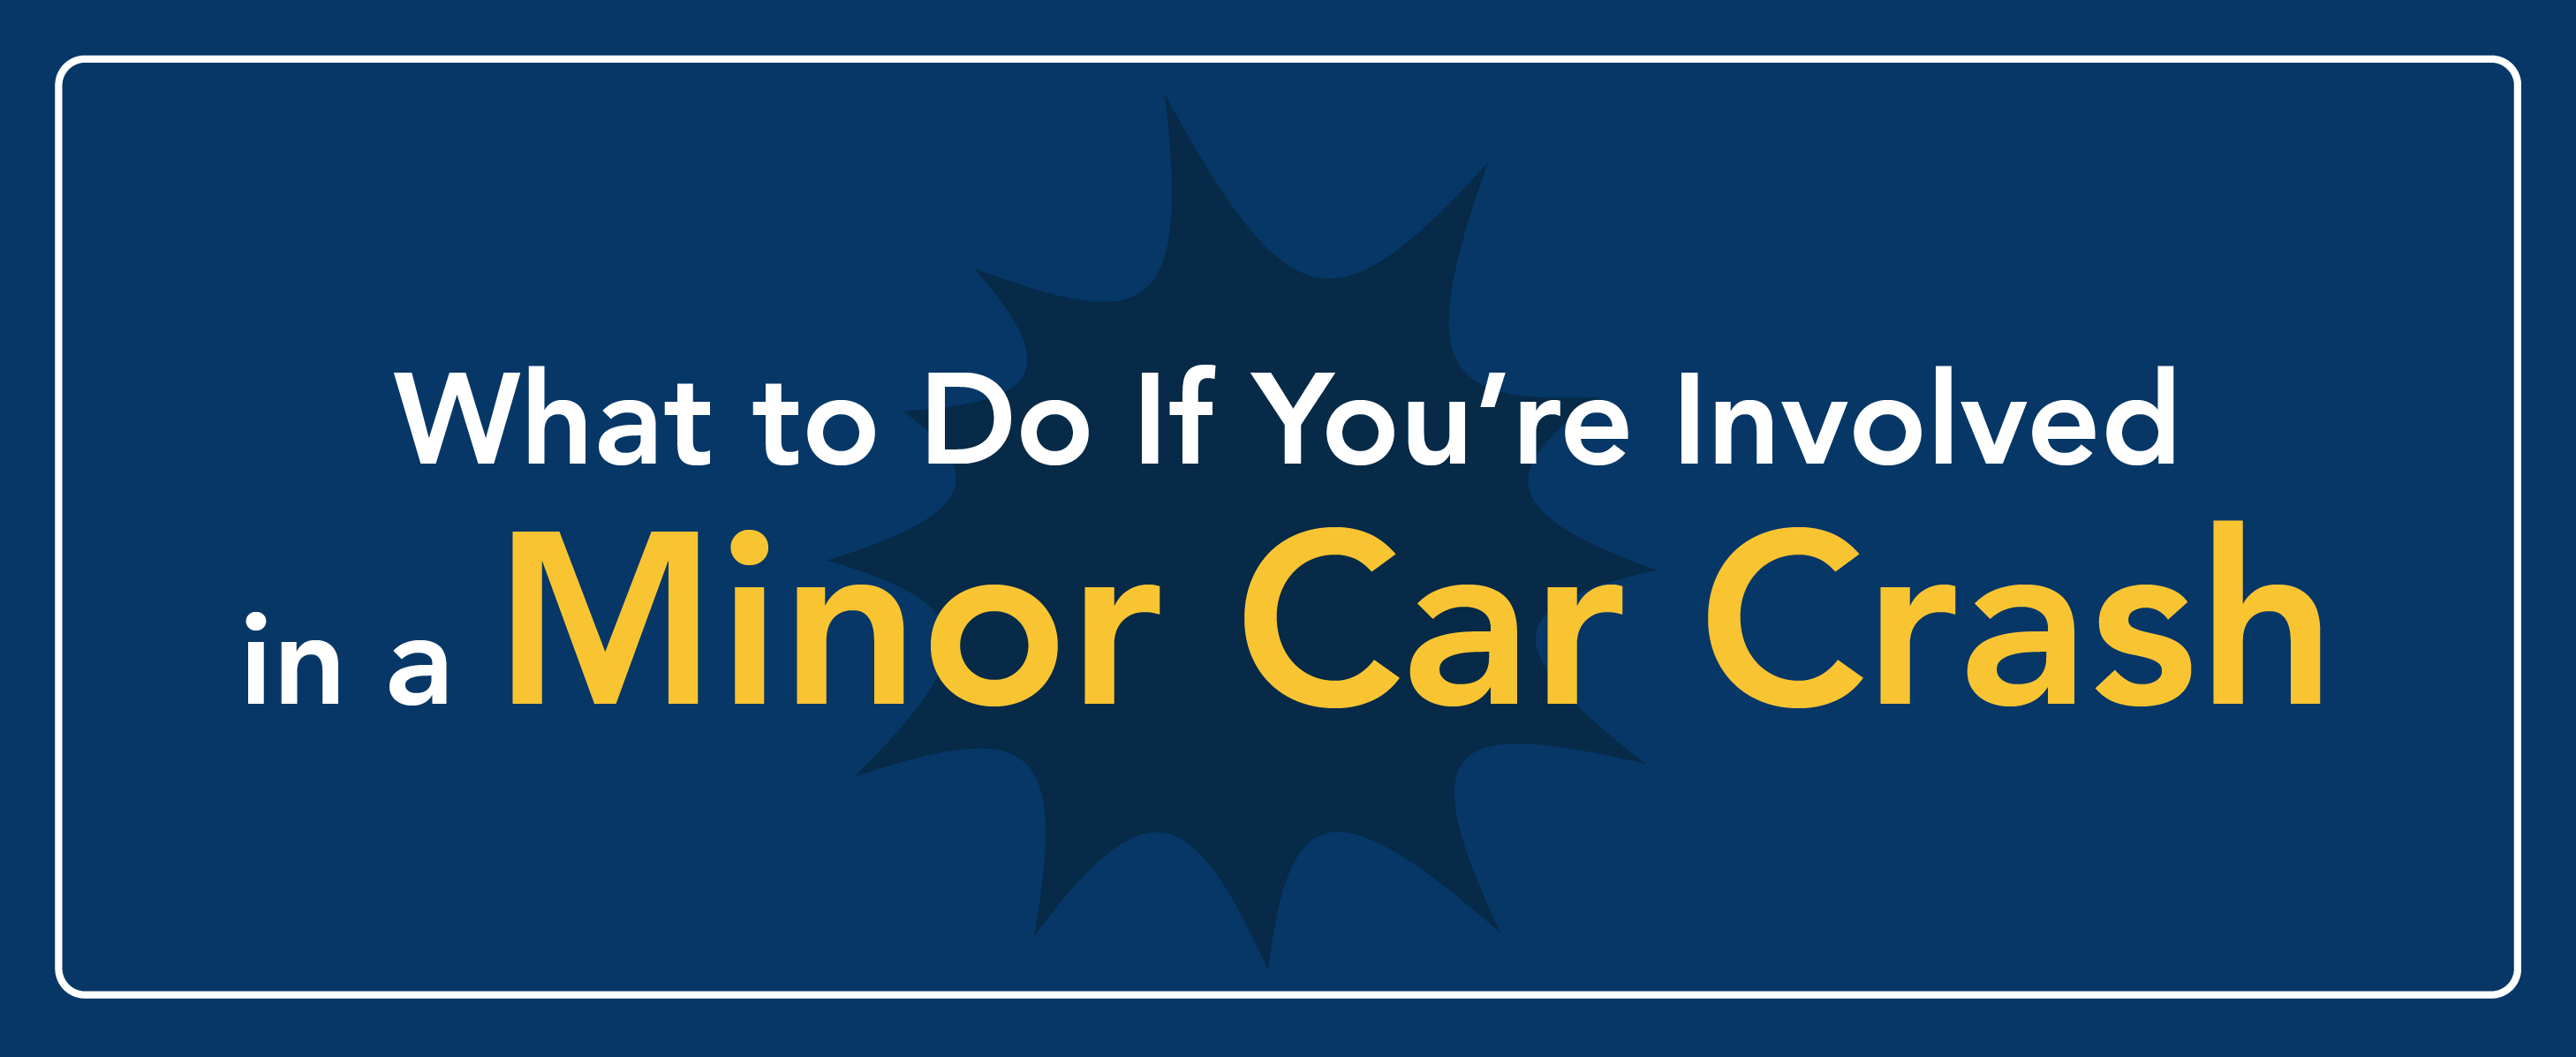 What to do if you're involved in a minor car crash.